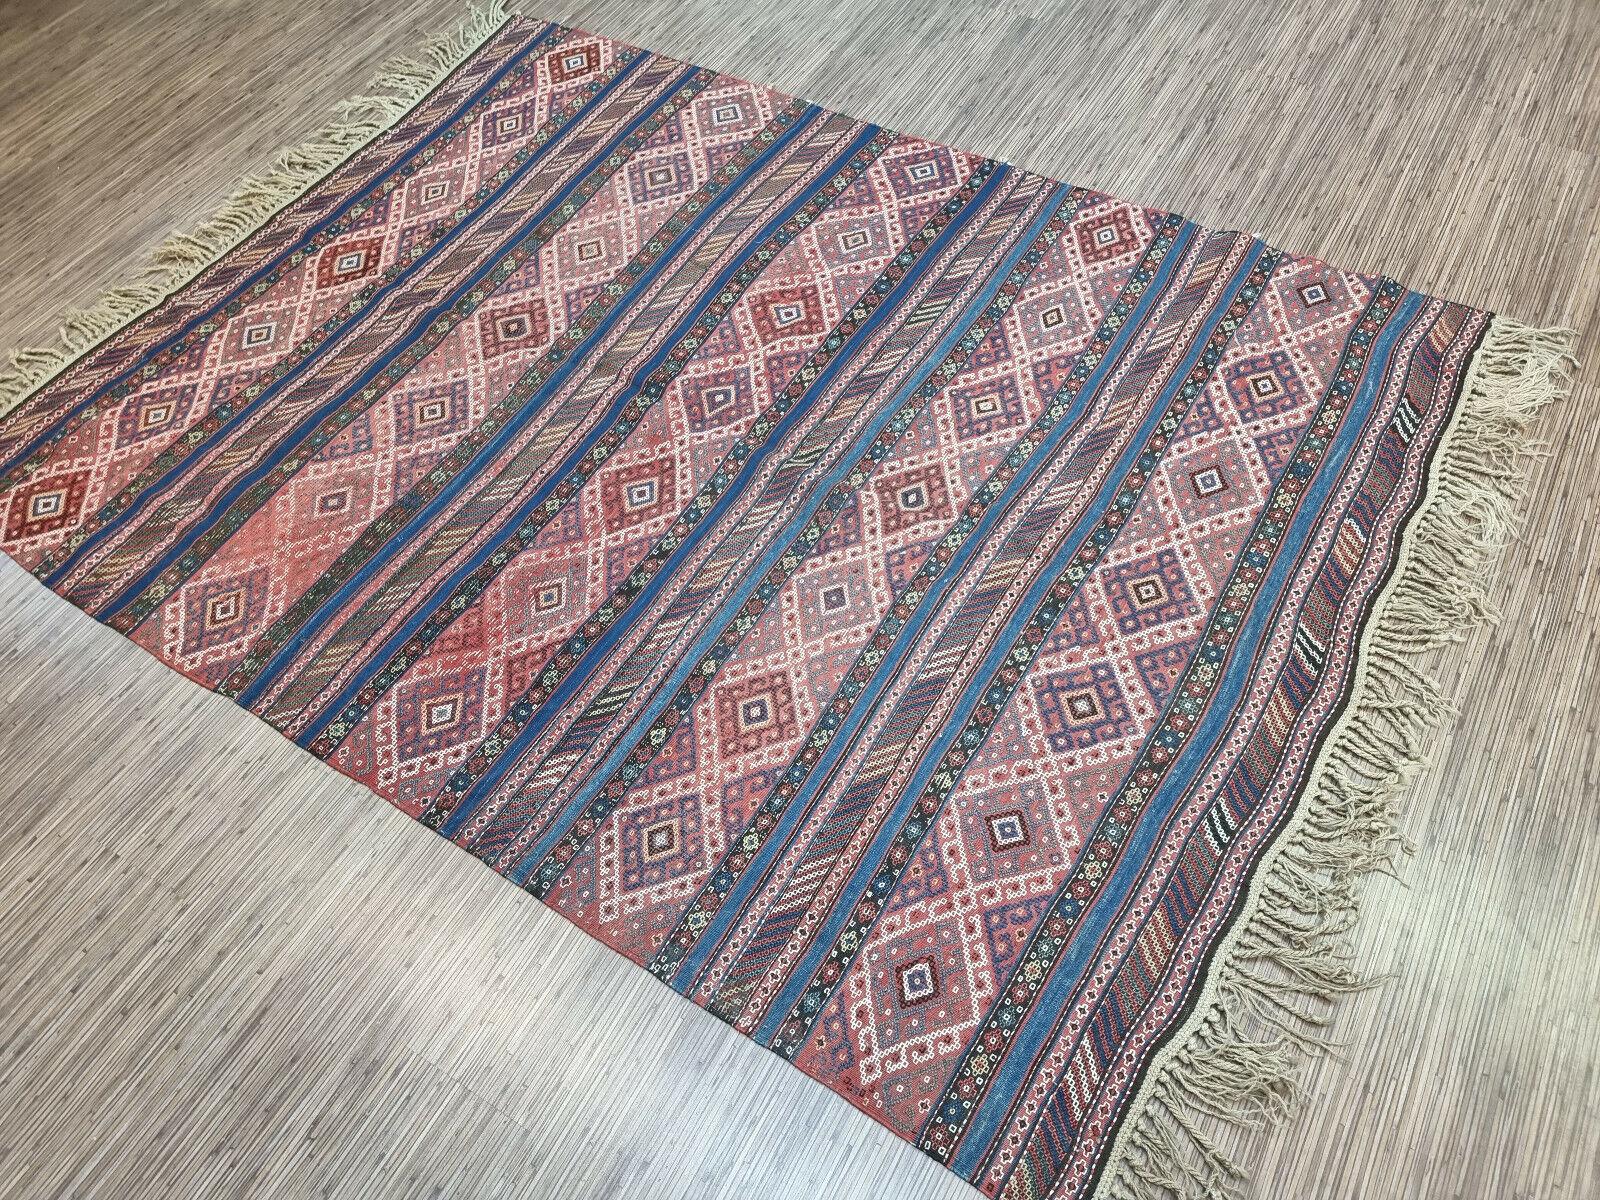 Handmade Antique Persian Style Sumak Kilim Rug 5.4’ x 7’, 1920s, Good Condition, Wool

Add a splash of color and style to your space with this handmade antique Persian style Sumak kilim rug. This beautiful rug was crafted in the 1920s, showcasing